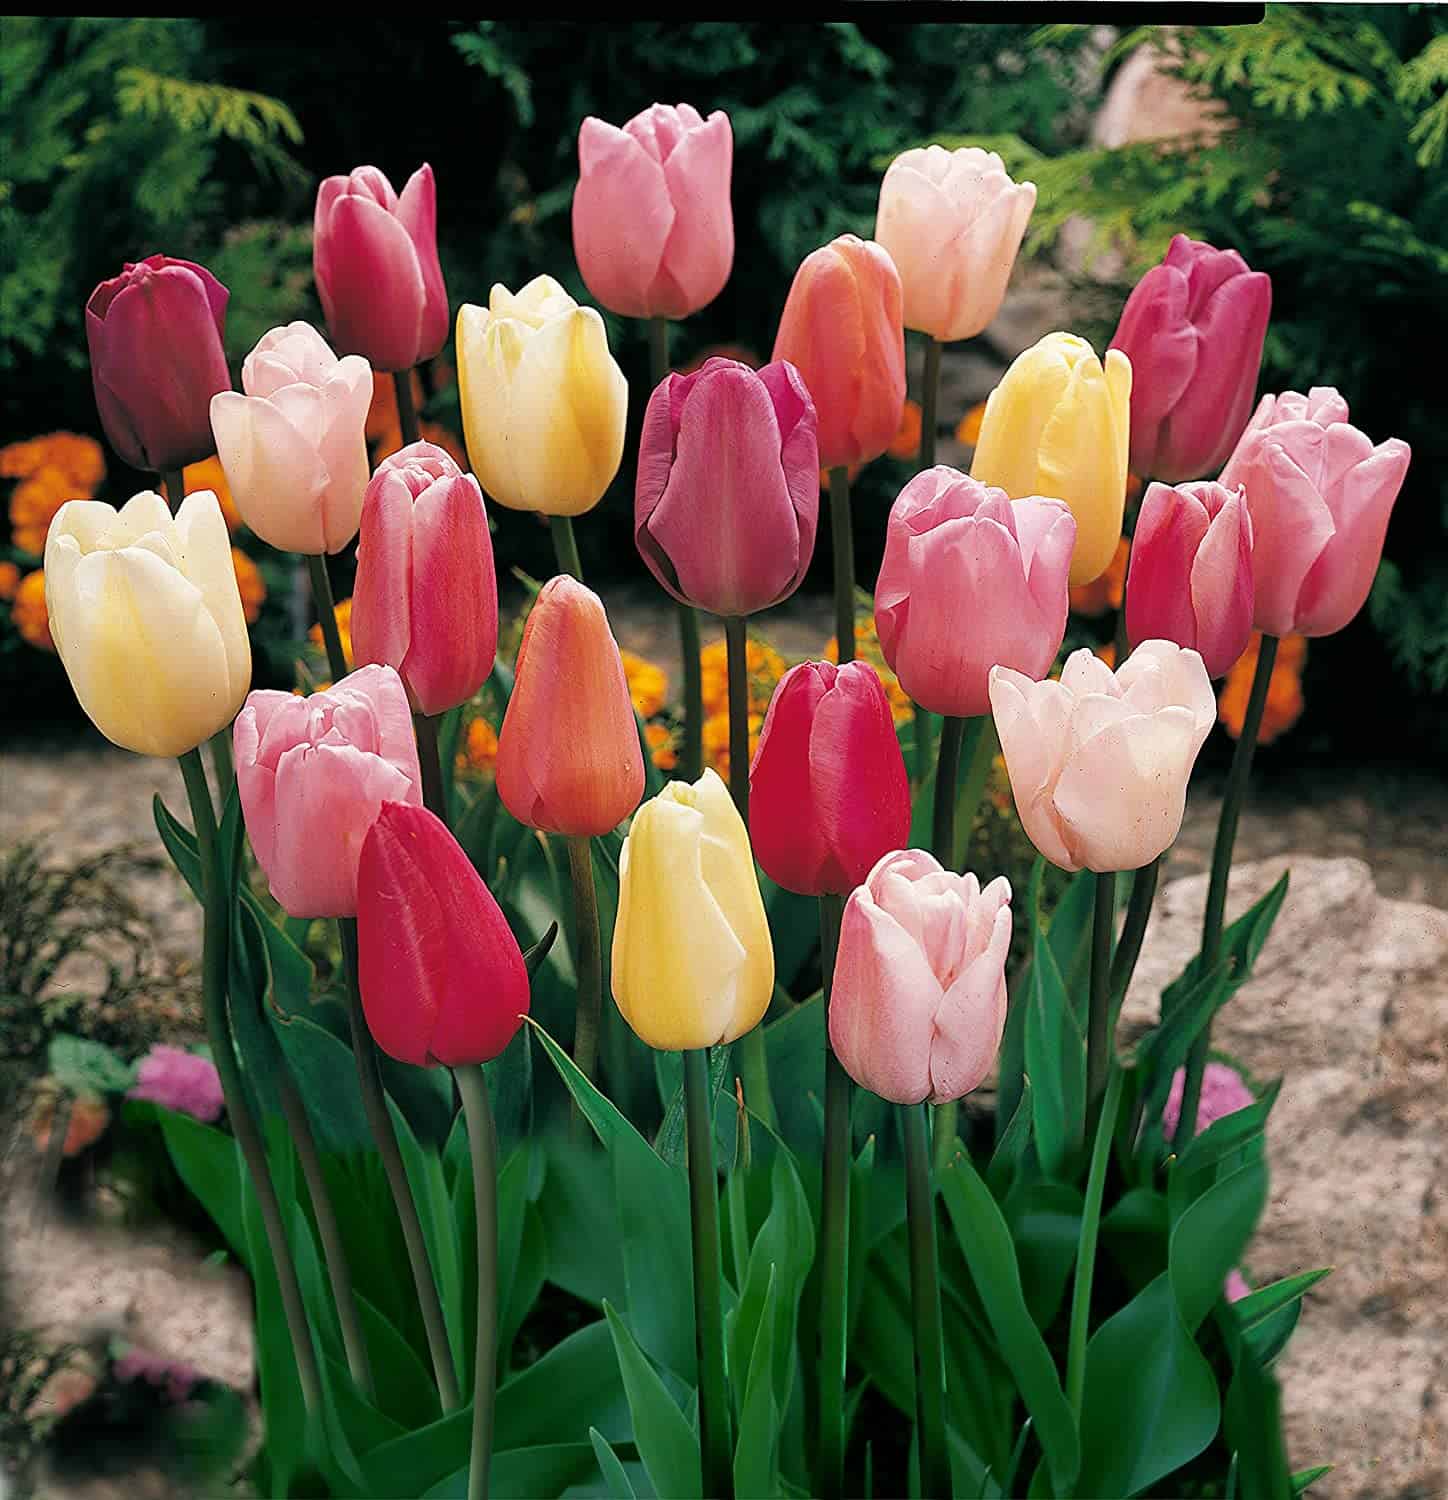 mixed Triumph Tulips bloom in a wide range of colors including red, yellow, and pink.